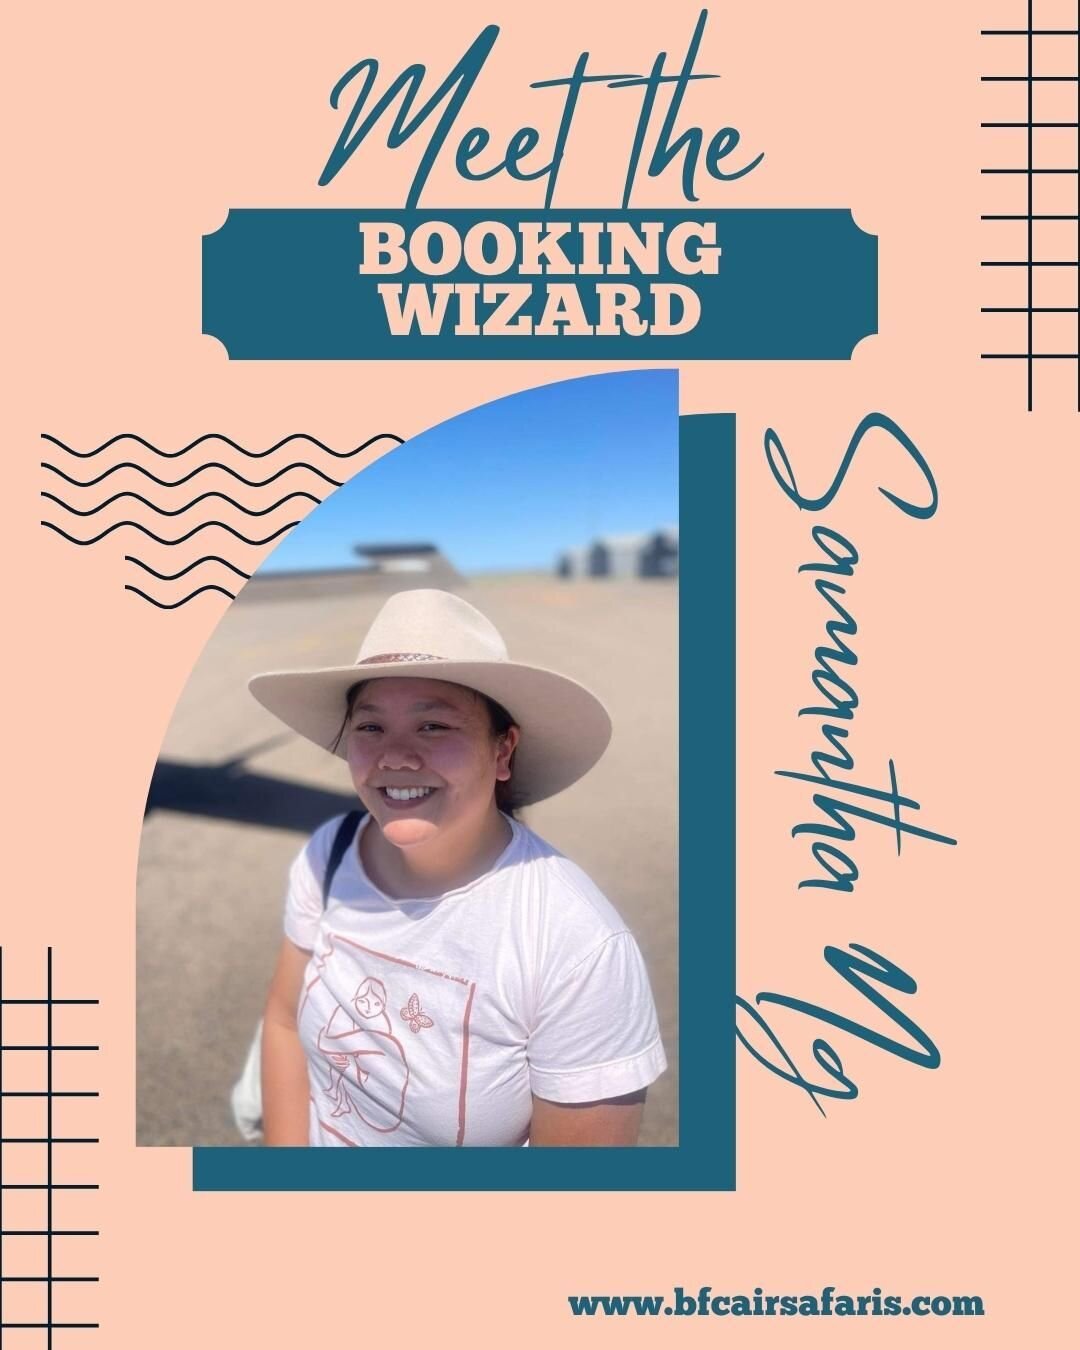 Our team is growing! Let me introduce our latest recruit, Samantha (Sammi), our incredible booking wizard. She will help you with all your booking needs, send out our welcome packs and answer any questions about the tours. Staying in the family, Jame